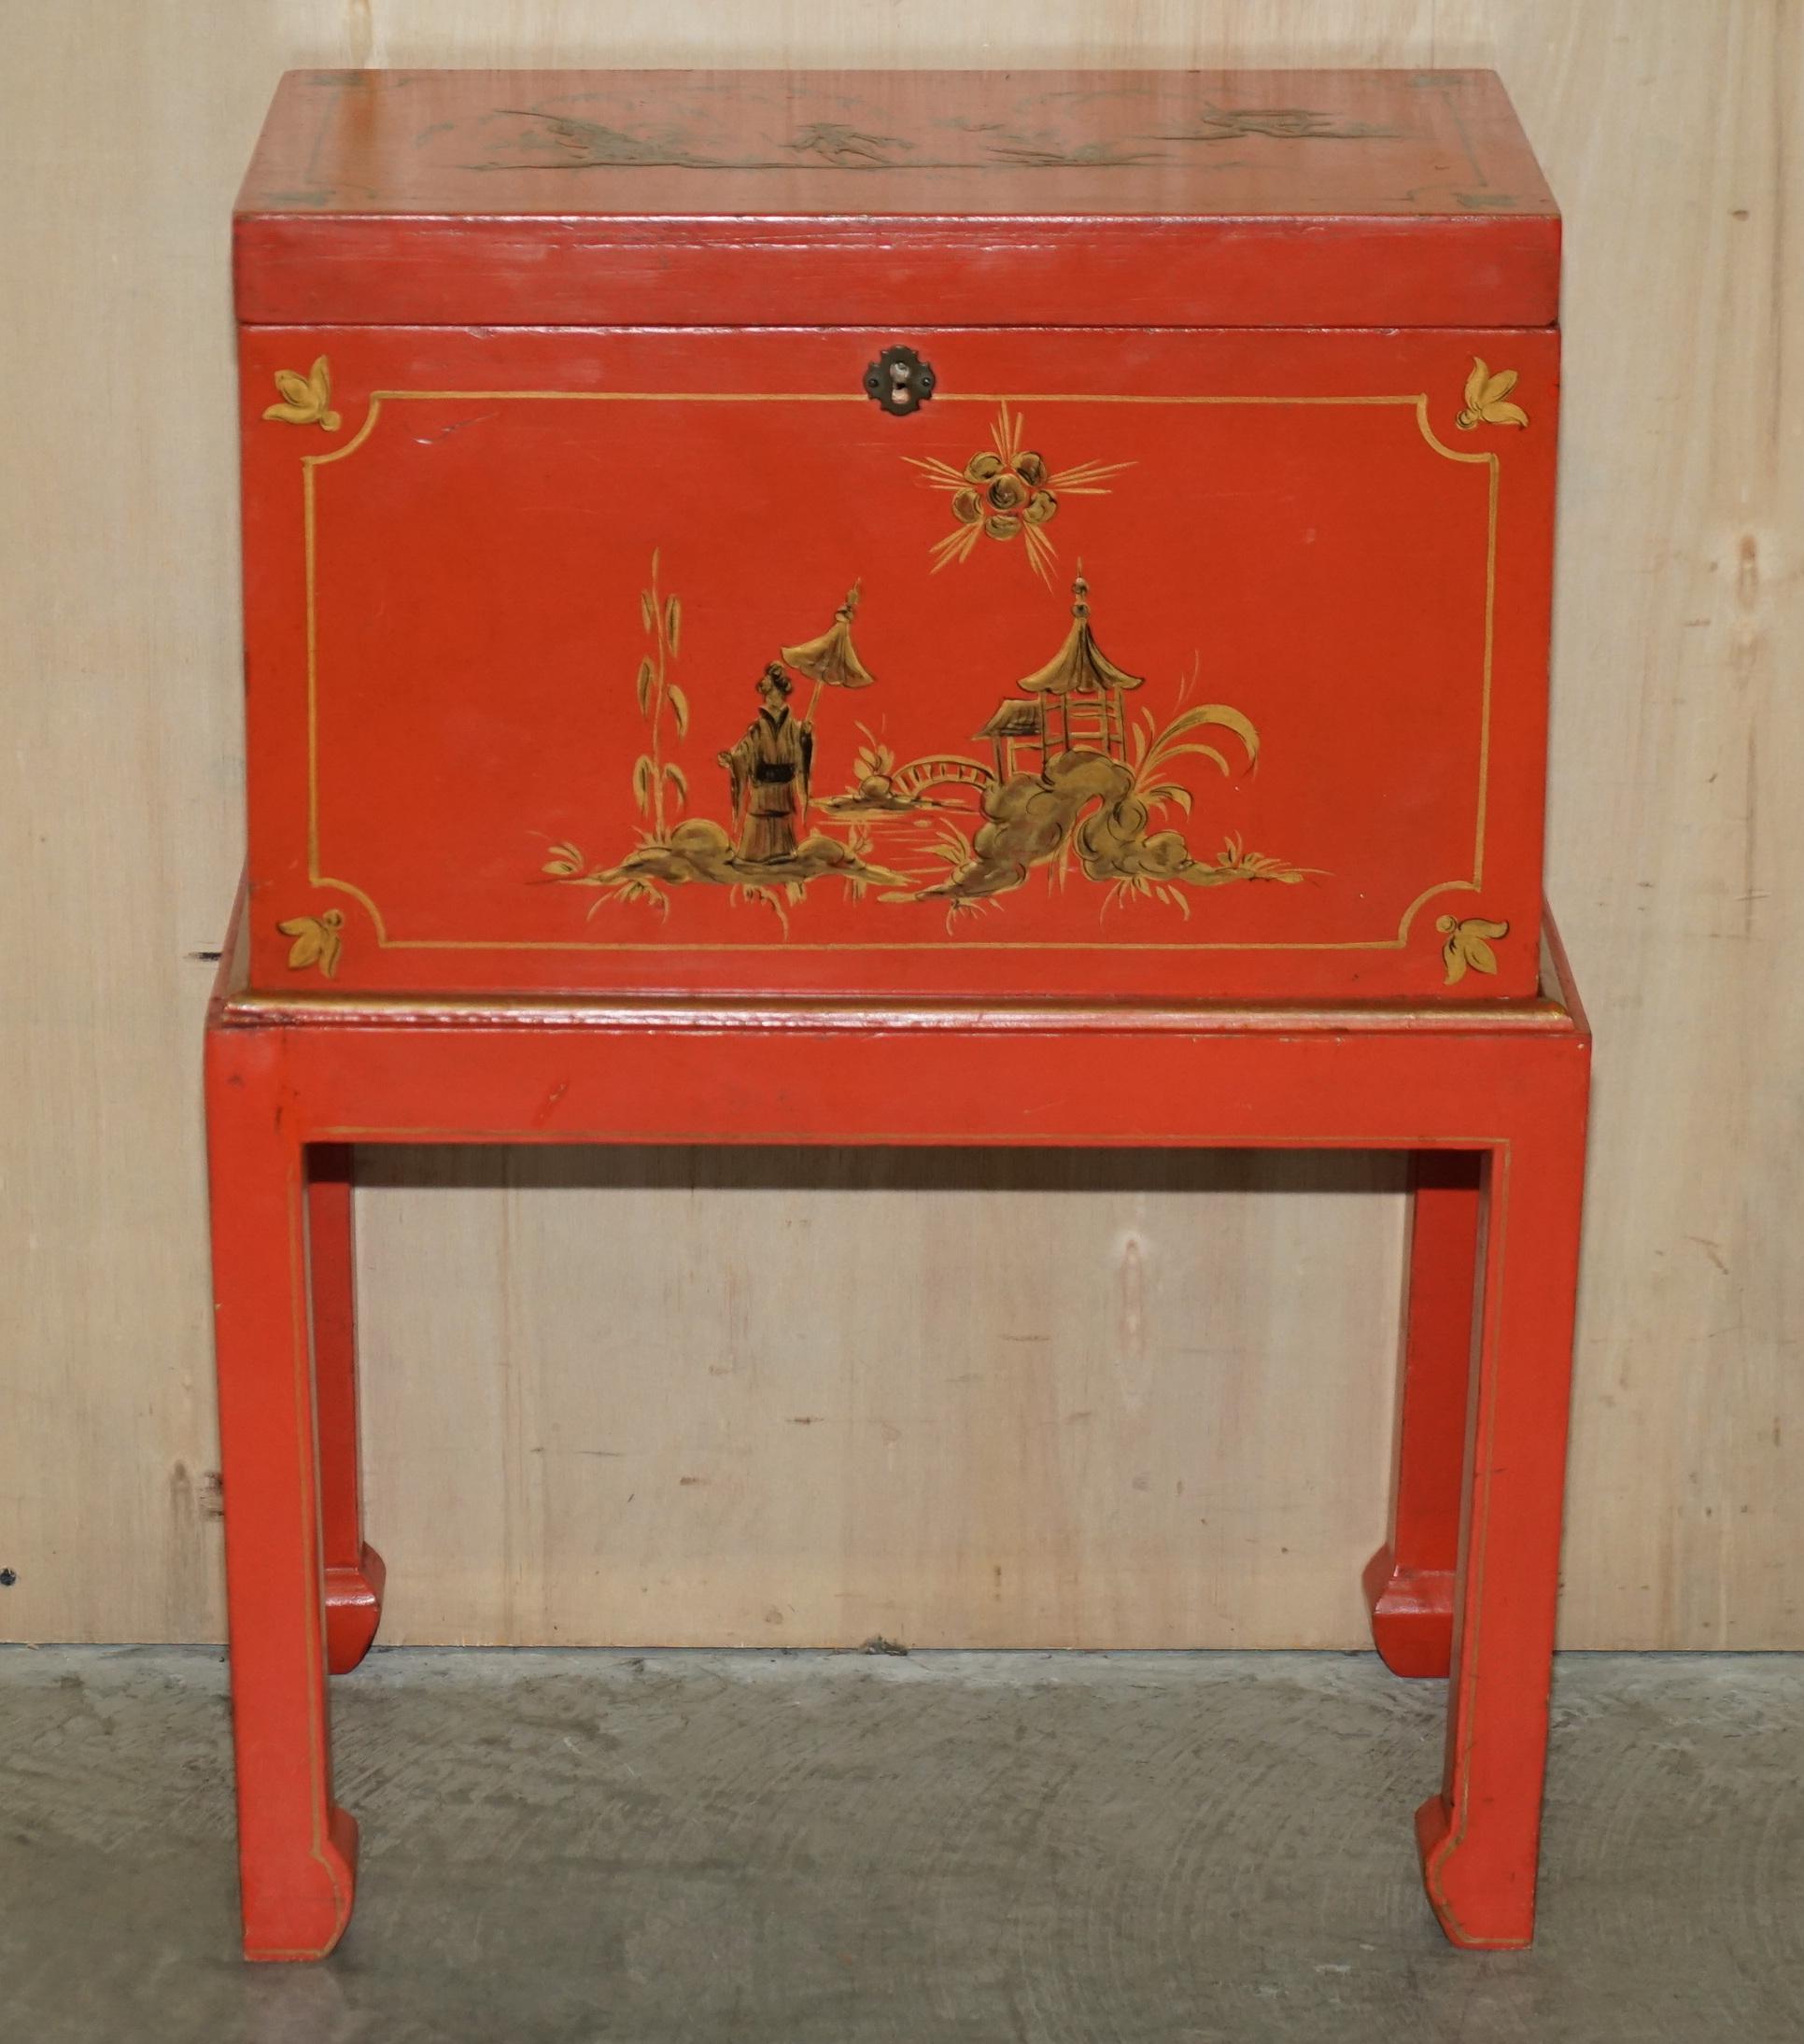 We are delighted to offer for sale this lovely vintage circa 1920's hand painted and lacquered Jappaned chest on stand.

A very good looking and well made piece, I have another of these exactly the same listed under my other items in yellow. These